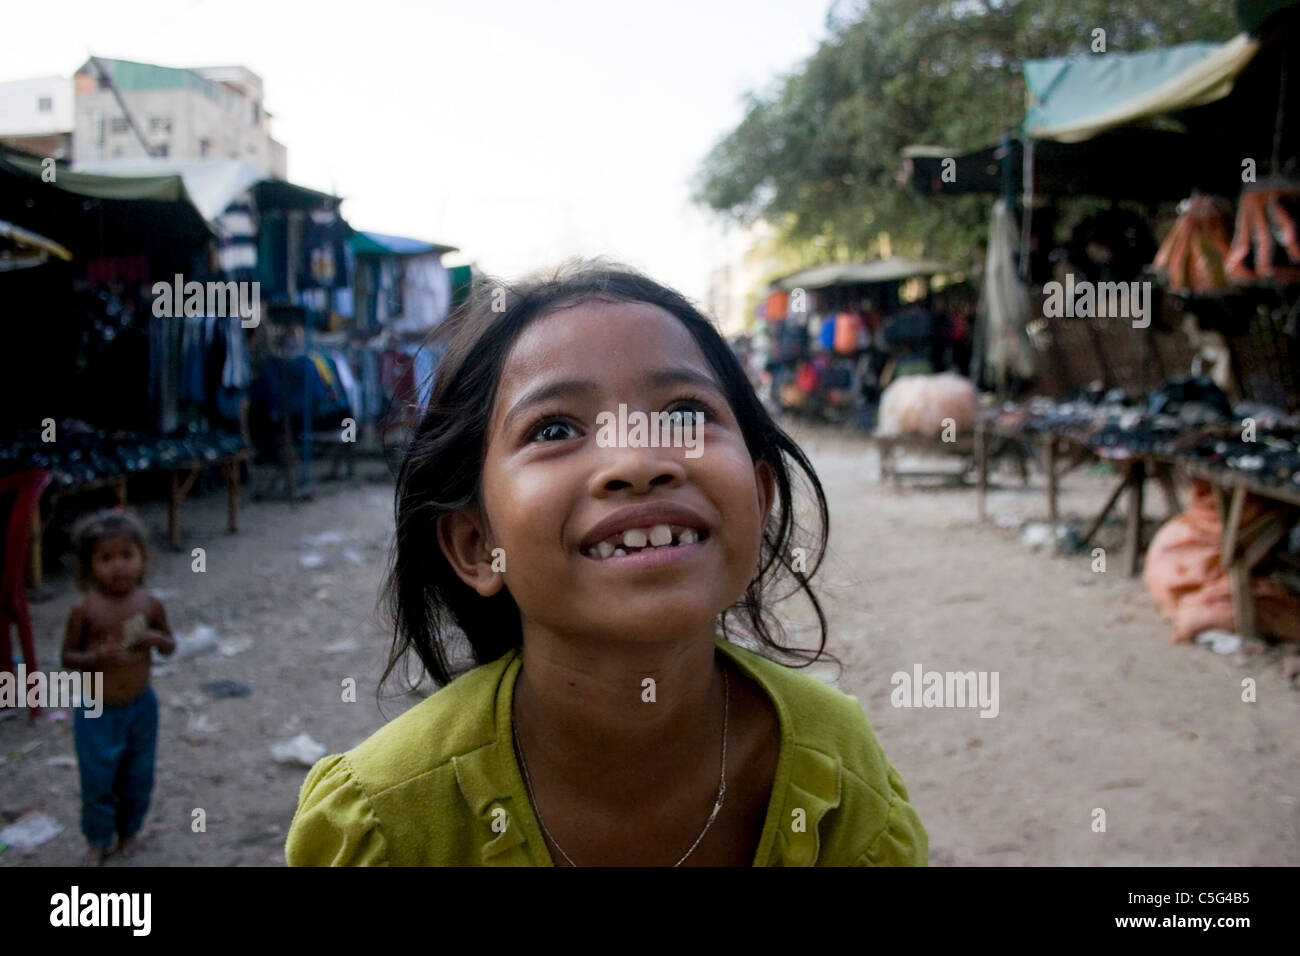 A young girl living in poverty is smiling near her home in a slum in Phnom Penh, Cambodia. Stock Photo